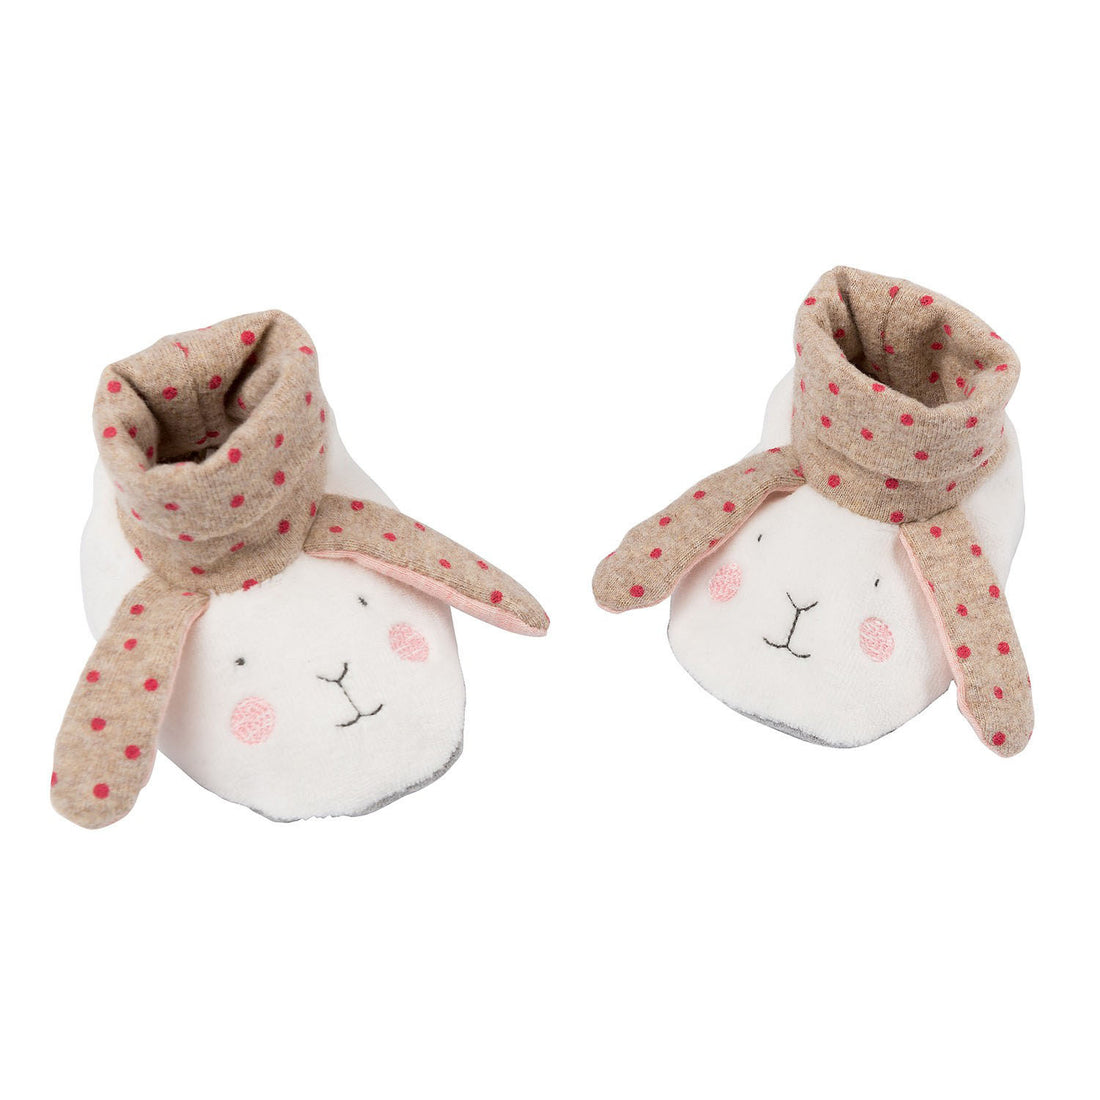 moulin-roty-polkadots-baby-slippers-lpd-01